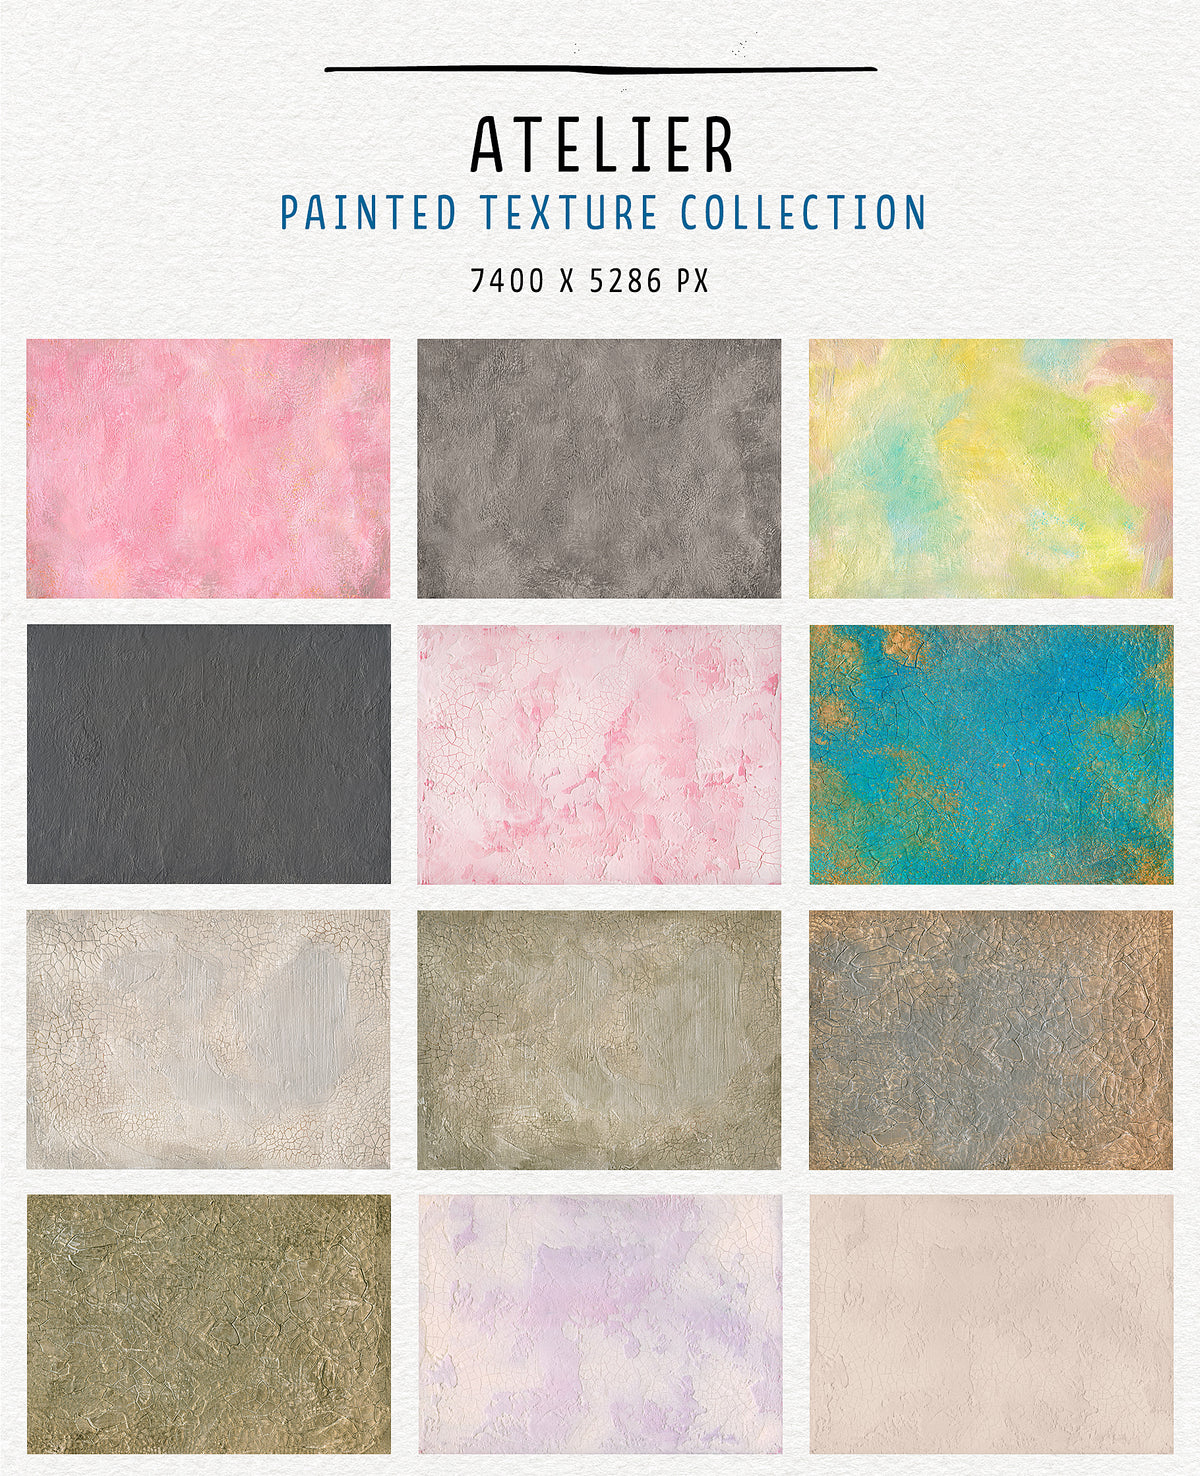 Atelier hand-painted texture collection. Extra-large, extended commercial license.